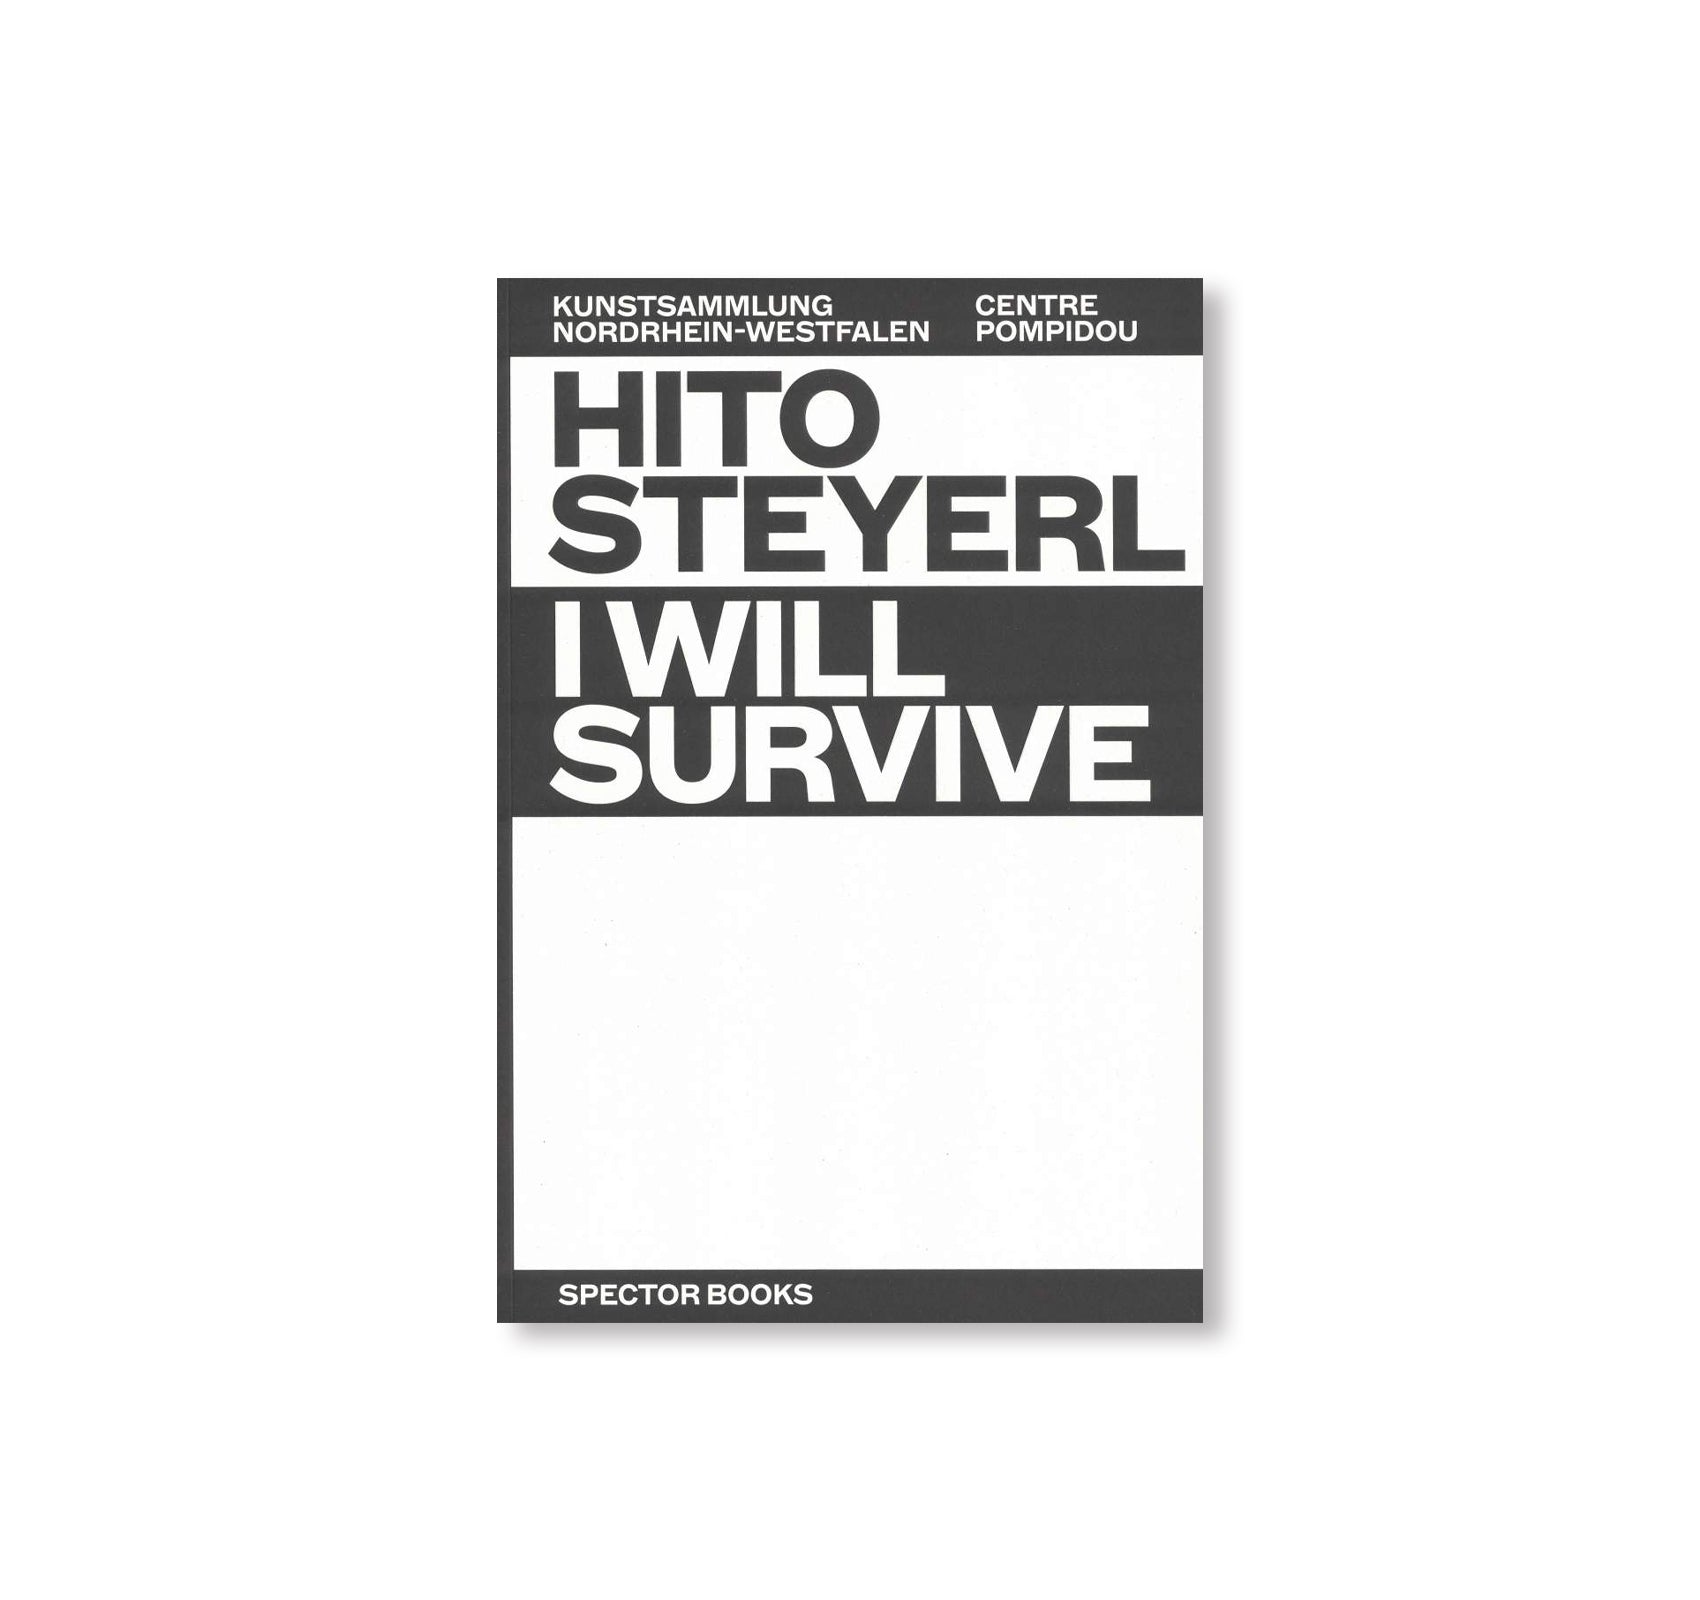 I WILL SURVIVE by Hito Steyerl